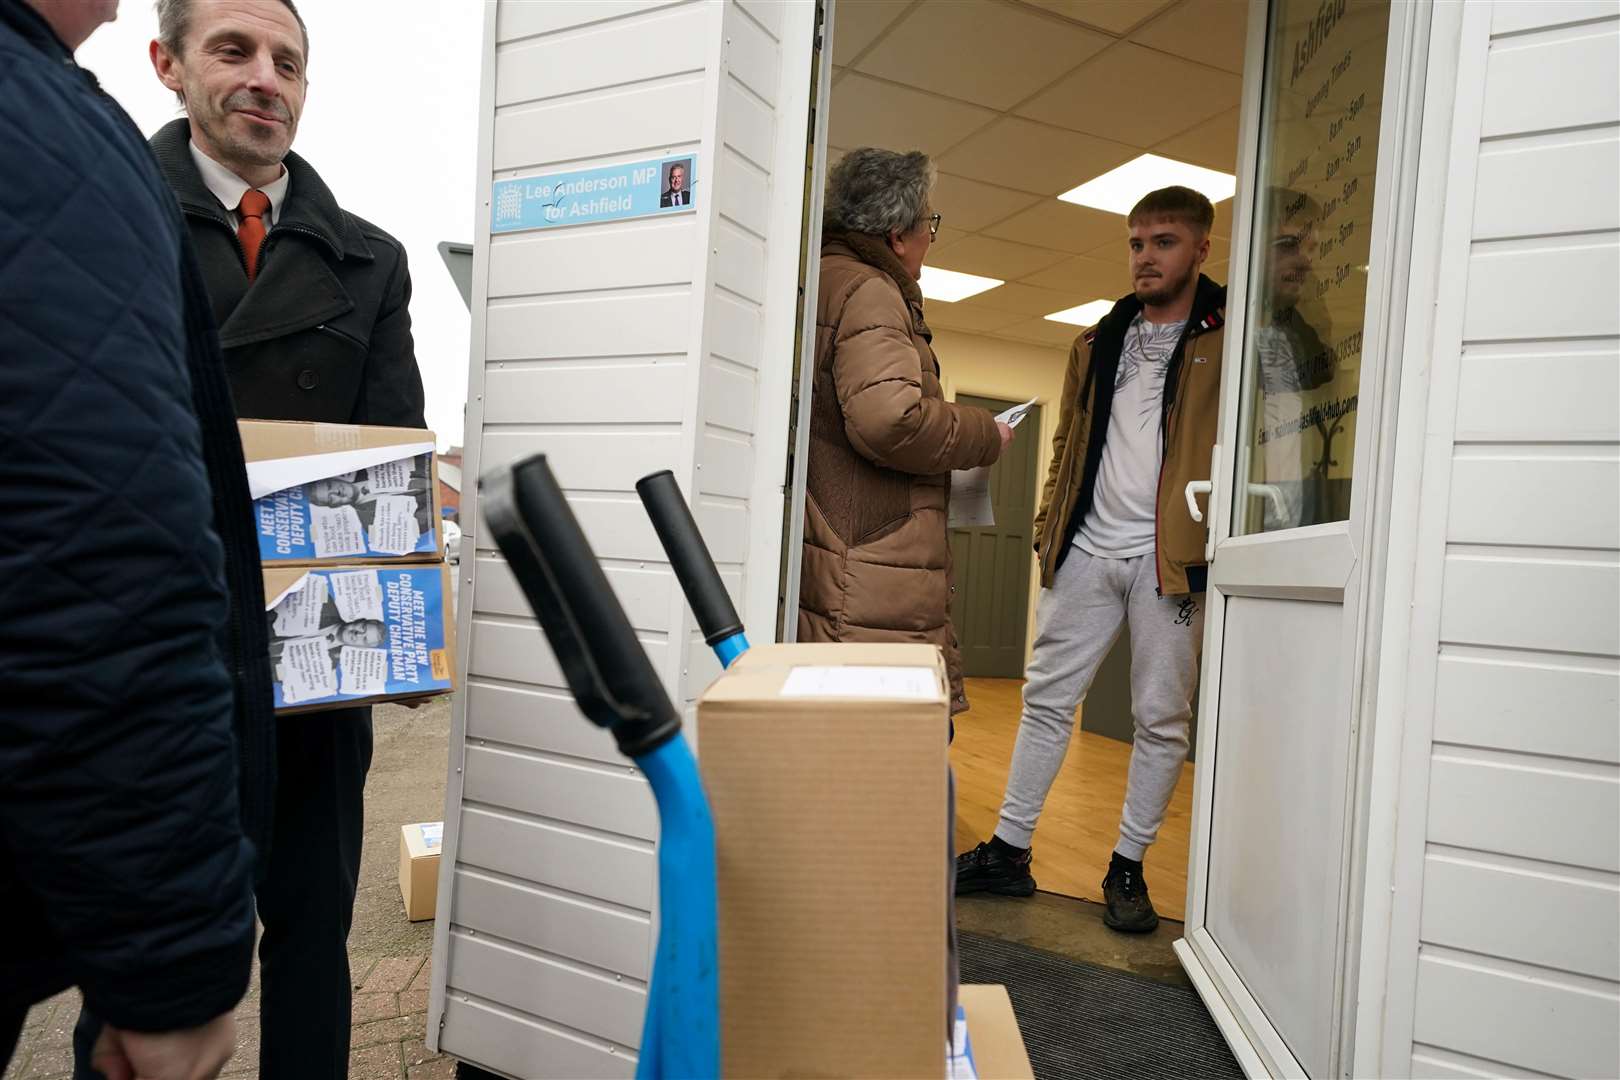 Baroness Pinnock was not given an alternative address for where she could drop off the posters (Jacob King/PA)